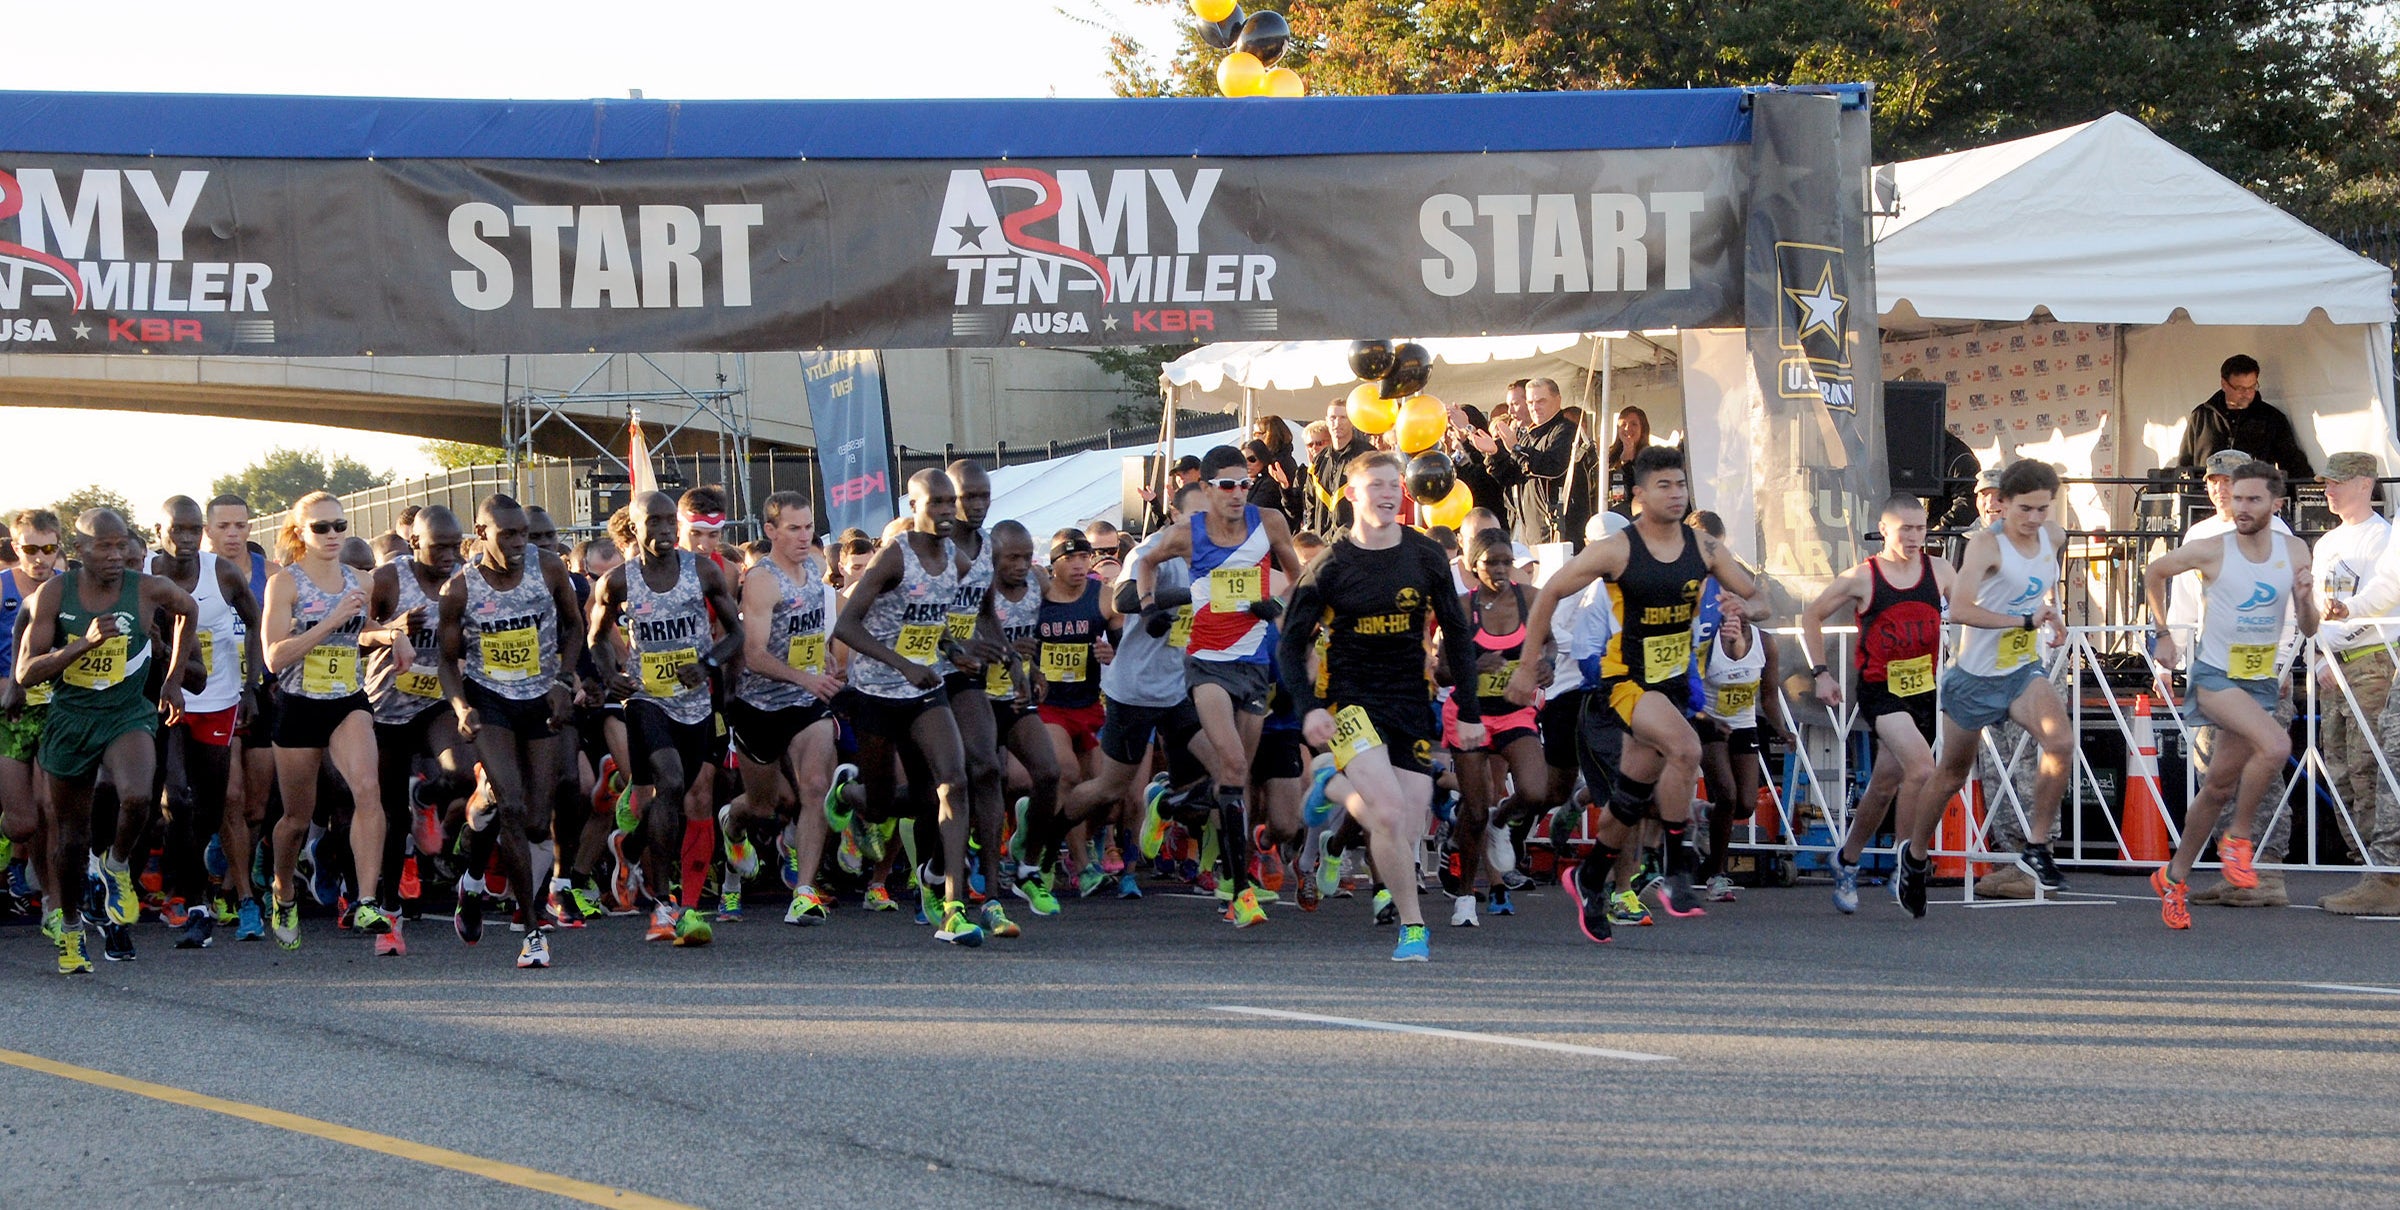 Army TenMiler General Registration Opens May 24 AUSA